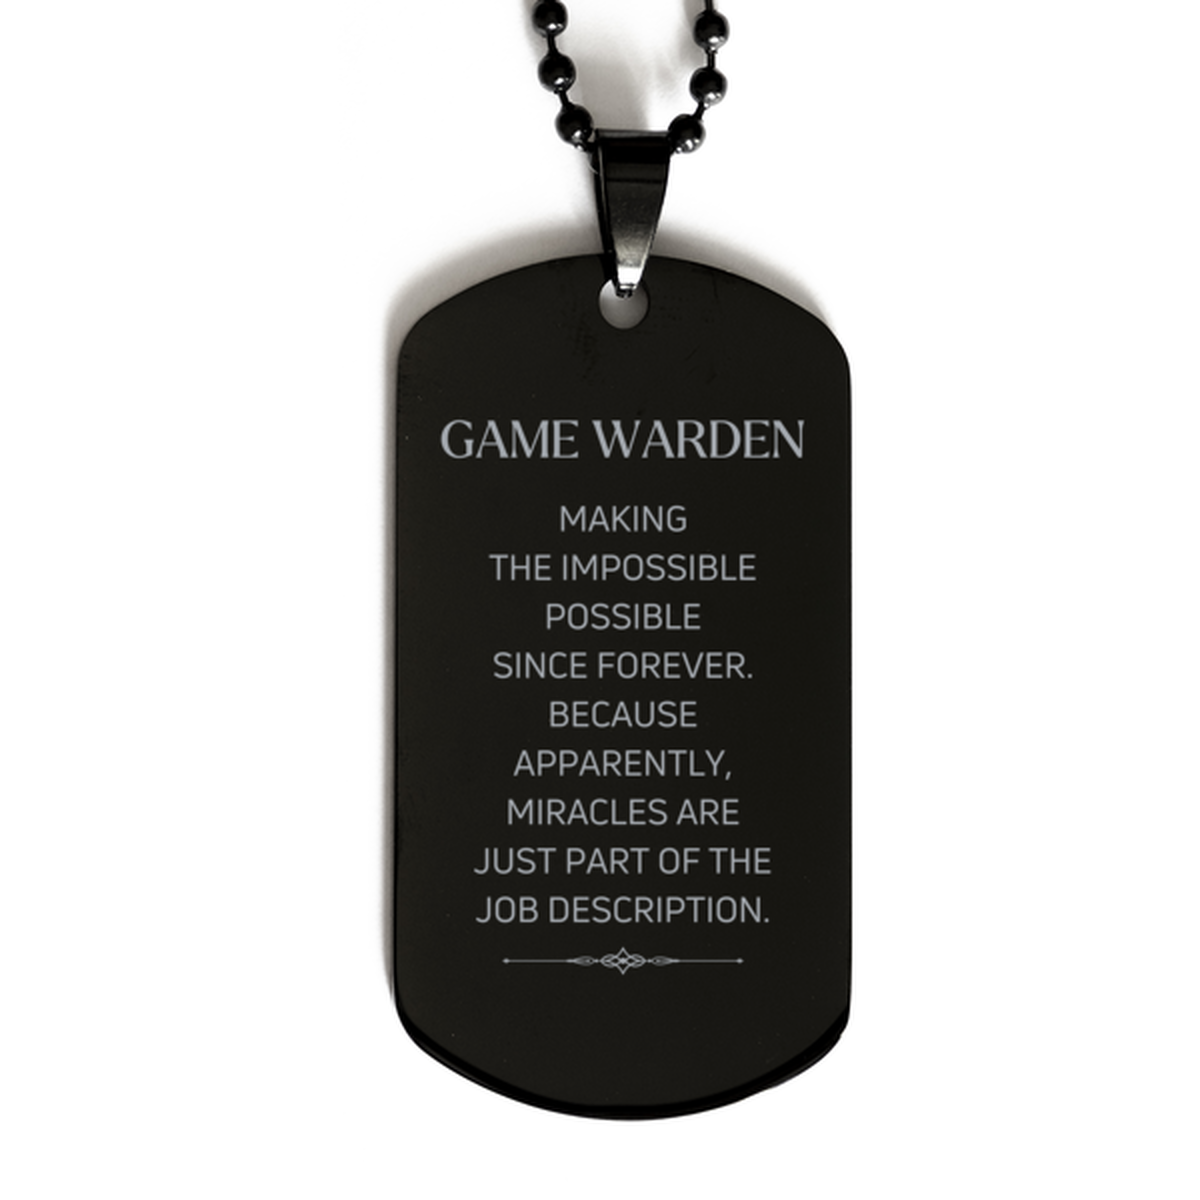 Funny Game Warden Gifts, Miracles are just part of the job description, Inspirational Birthday Black Dog Tag For Game Warden, Men, Women, Coworkers, Friends, Boss